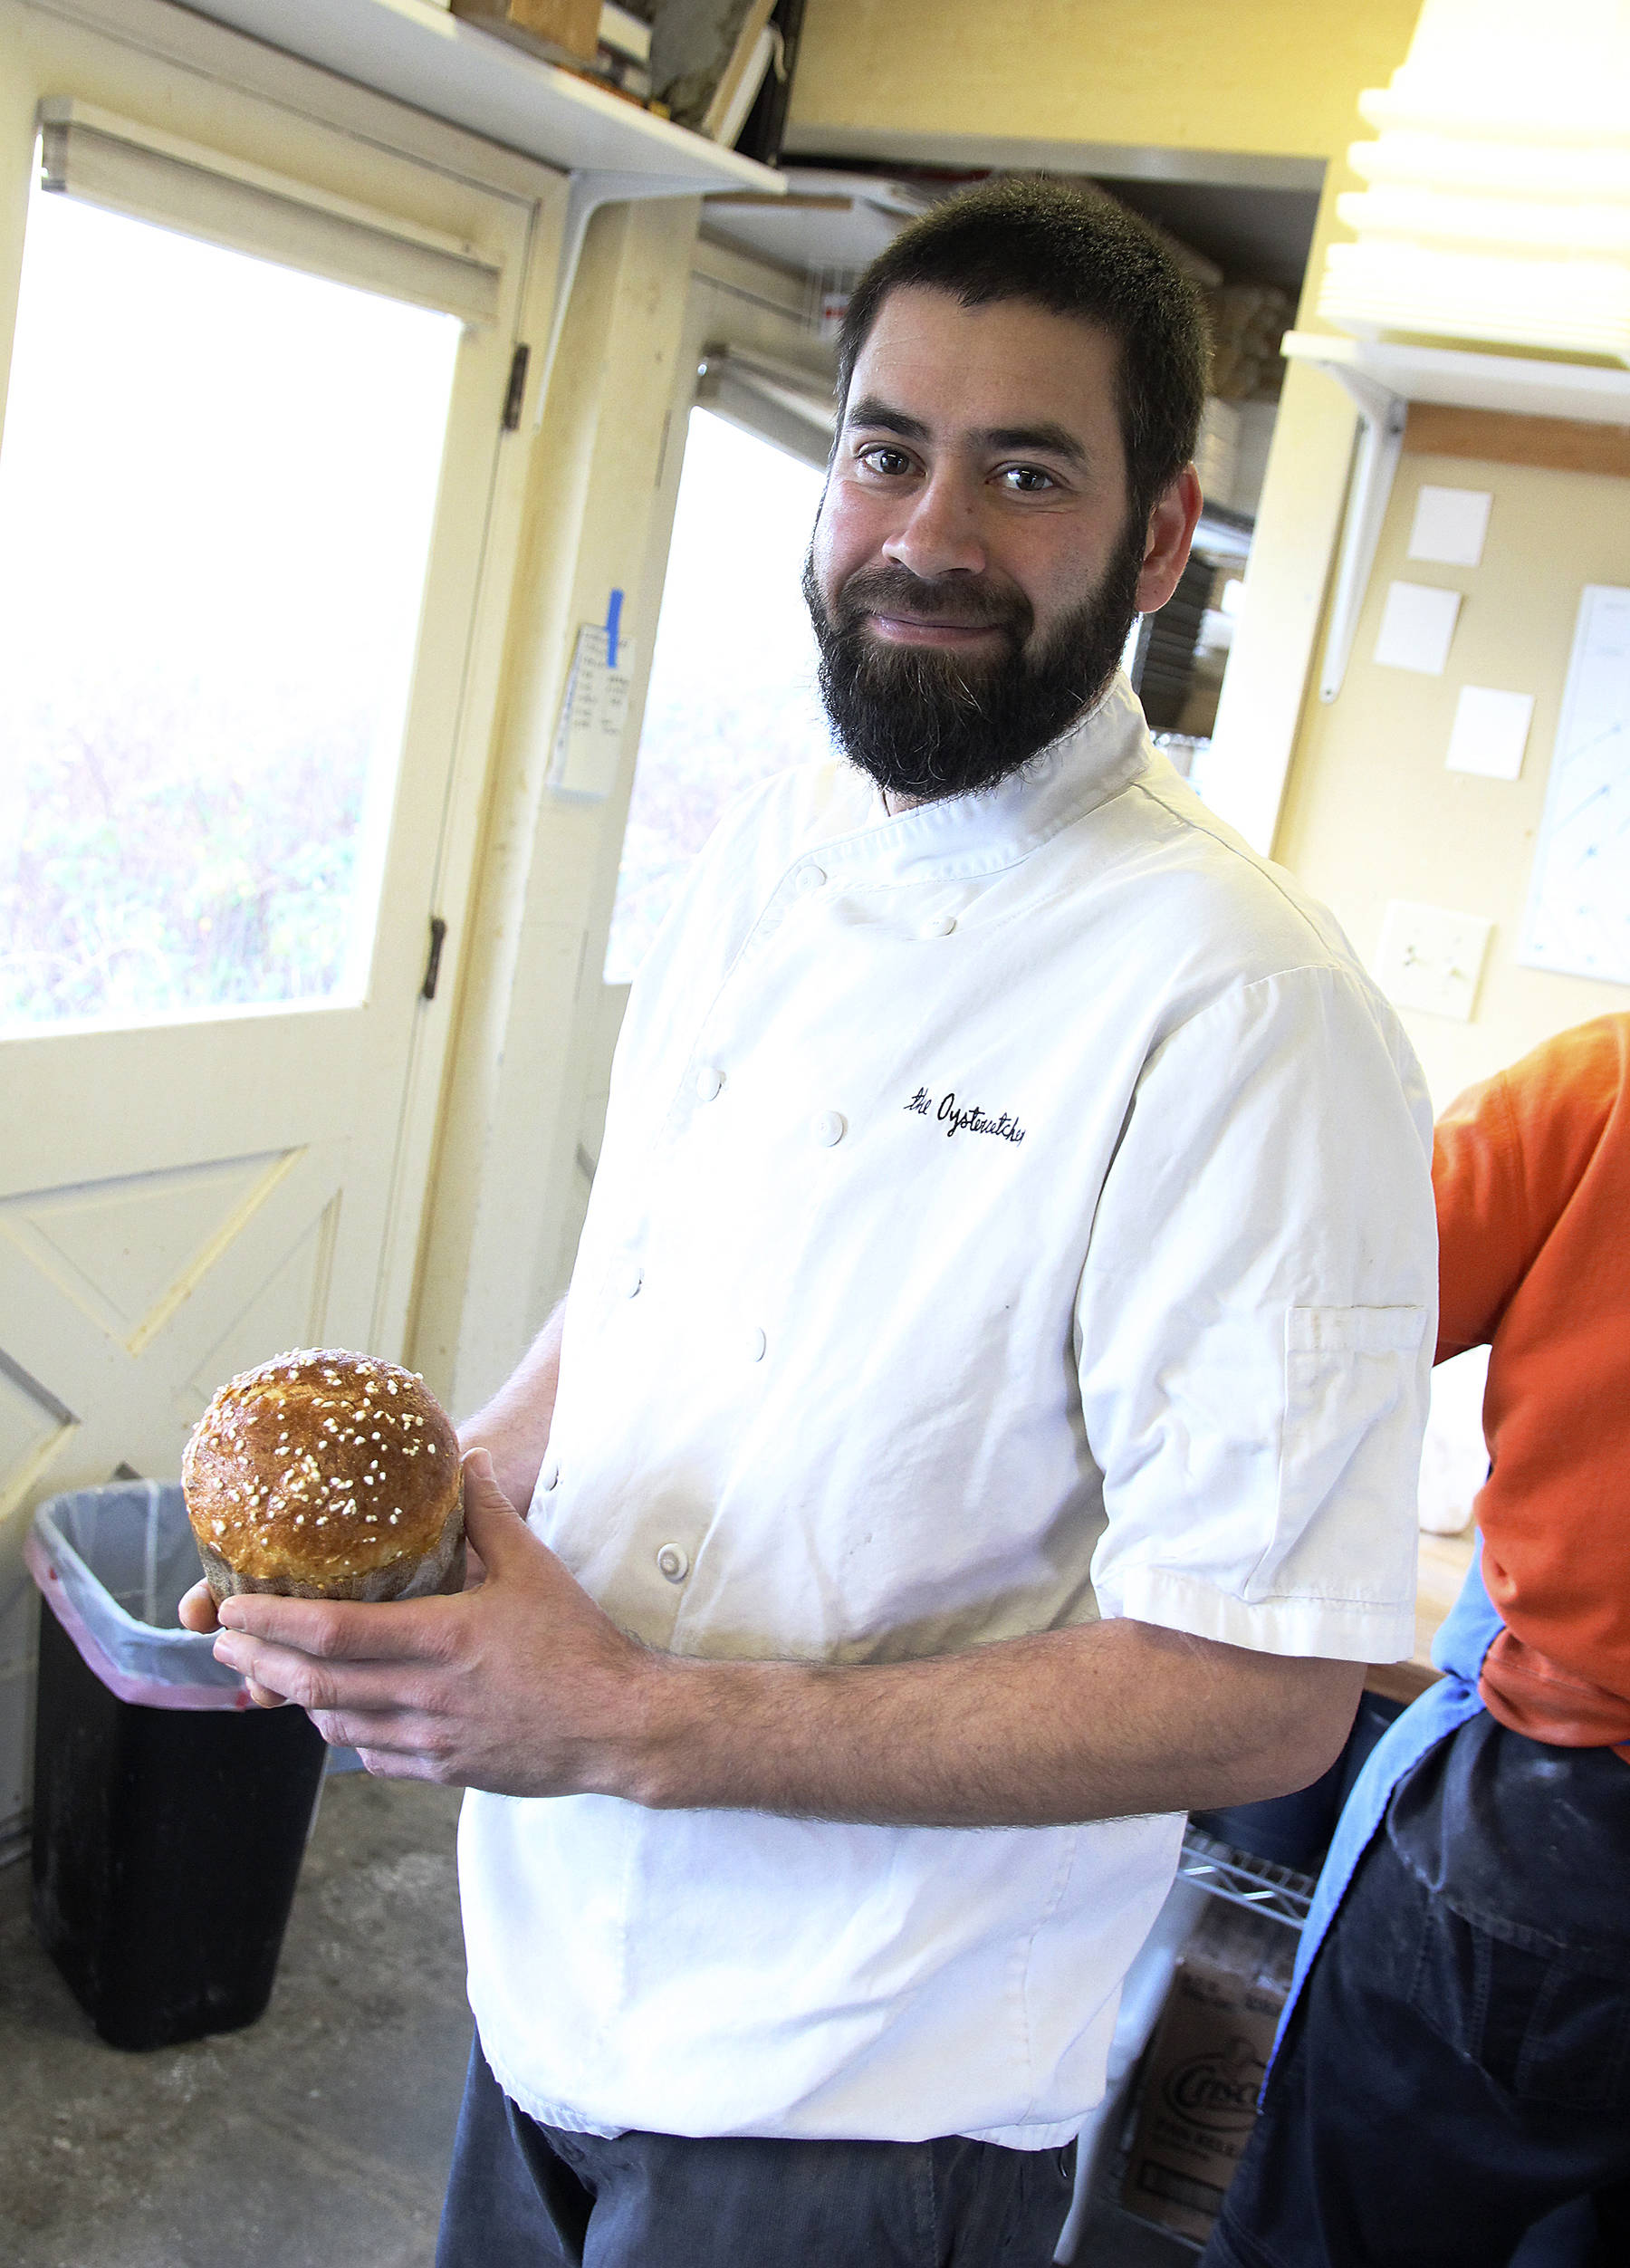 (Photo by Laura Guido/Whidbey News Times)                                Tyler Hansen, chef and owner of The Oystercatcher in Coupeville, holds a loaf of the restaurant’s holiday panettone. Left, herbs are applied liberally to make Roaming Radish executive chef/owner JP Dowell’s “perfect prime rib.”